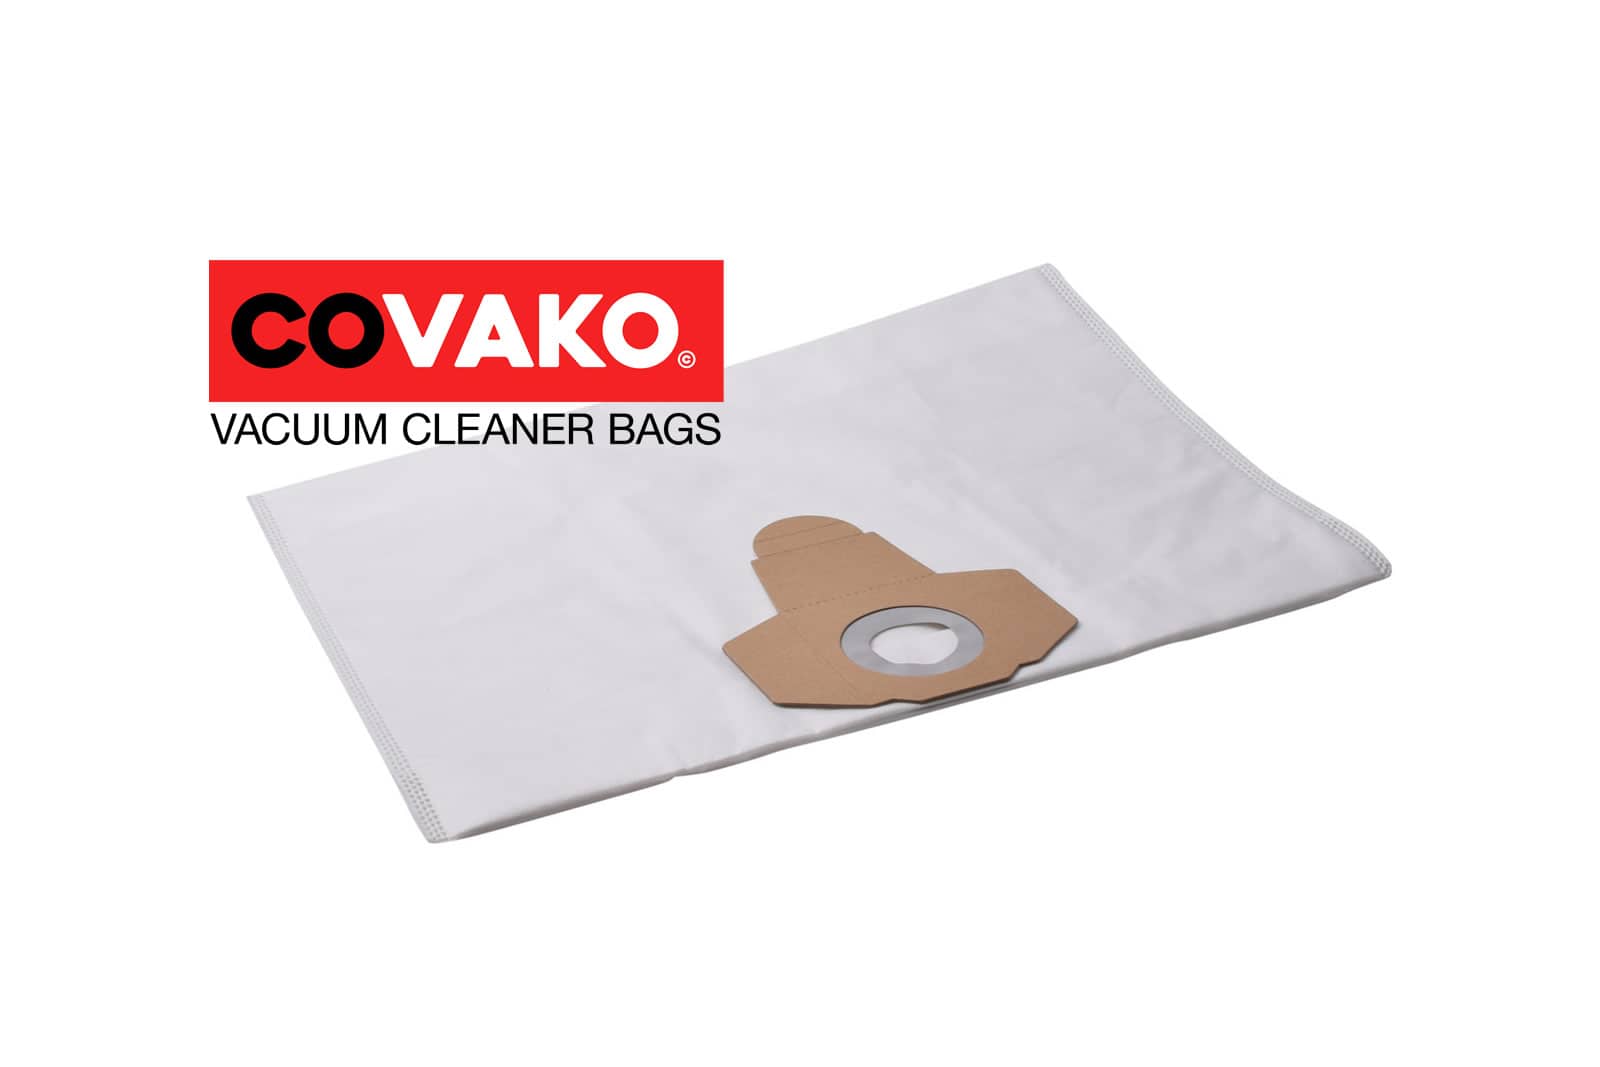 ewt Boxter 15 S EDS / Synthesis - ewt vacuum cleaner bags